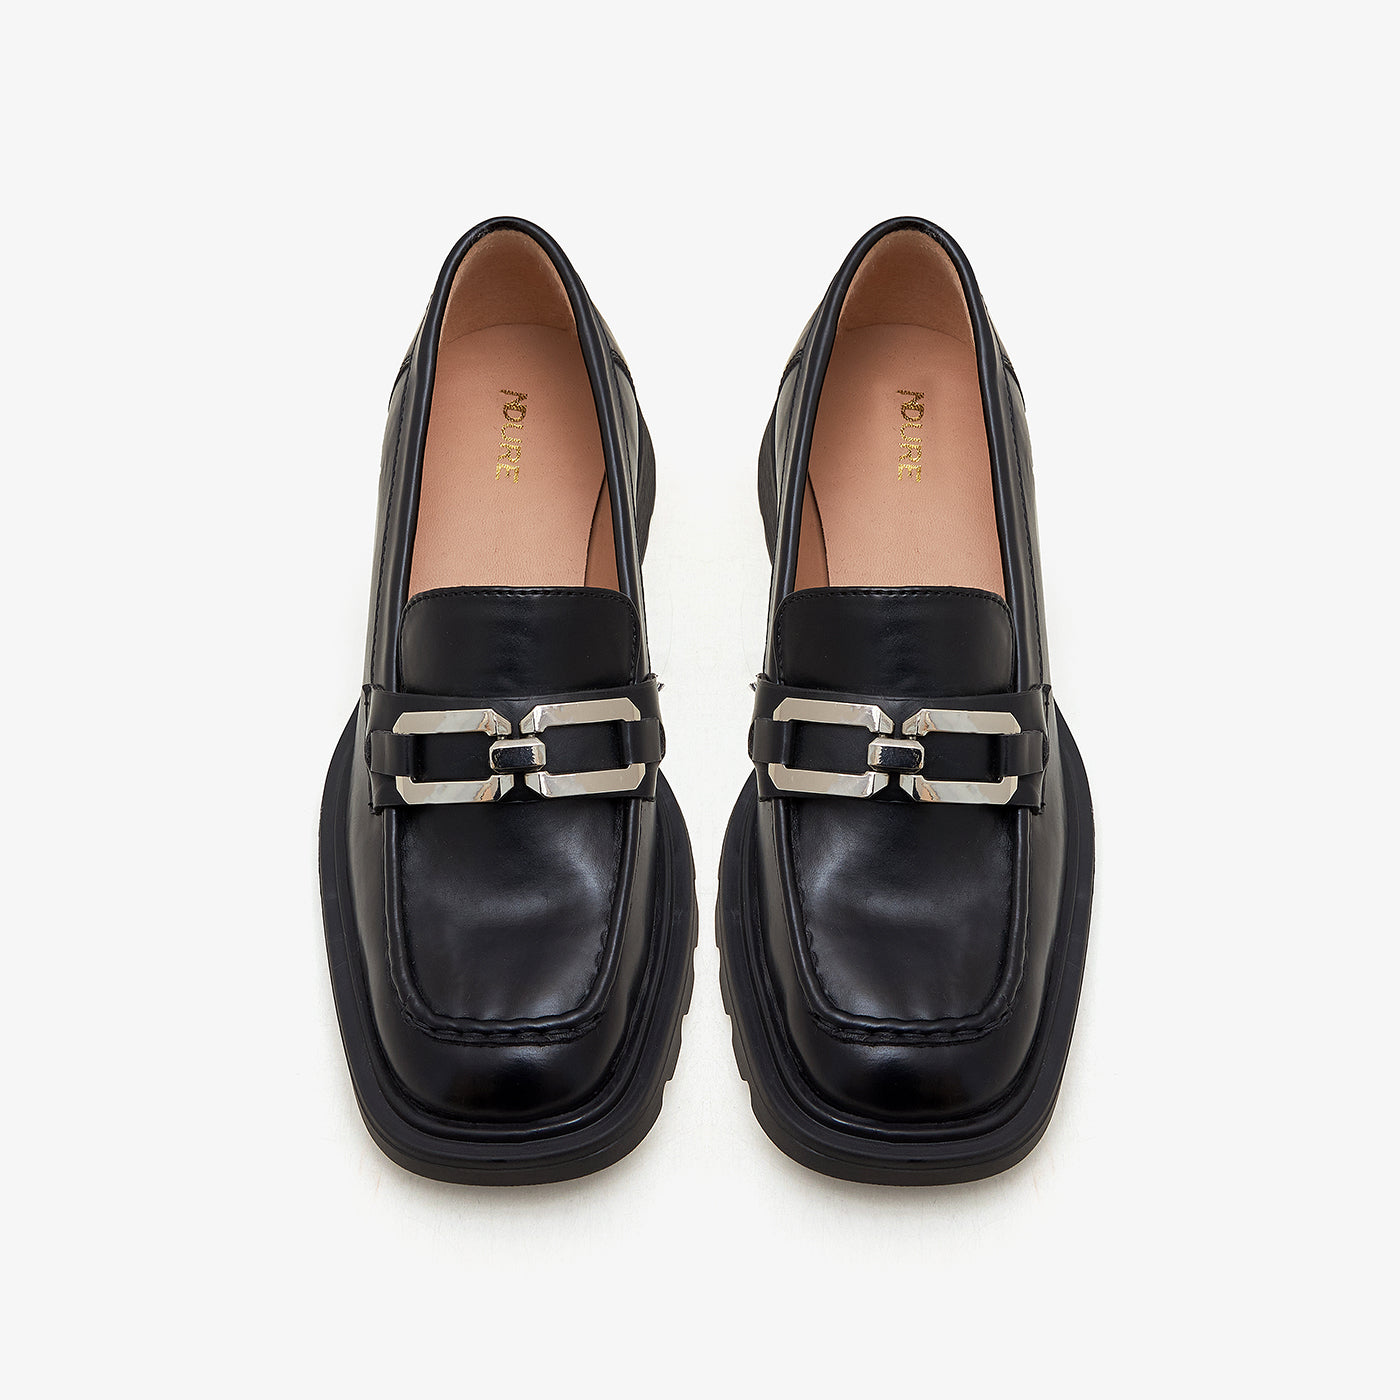 Women's Chunky Loafers